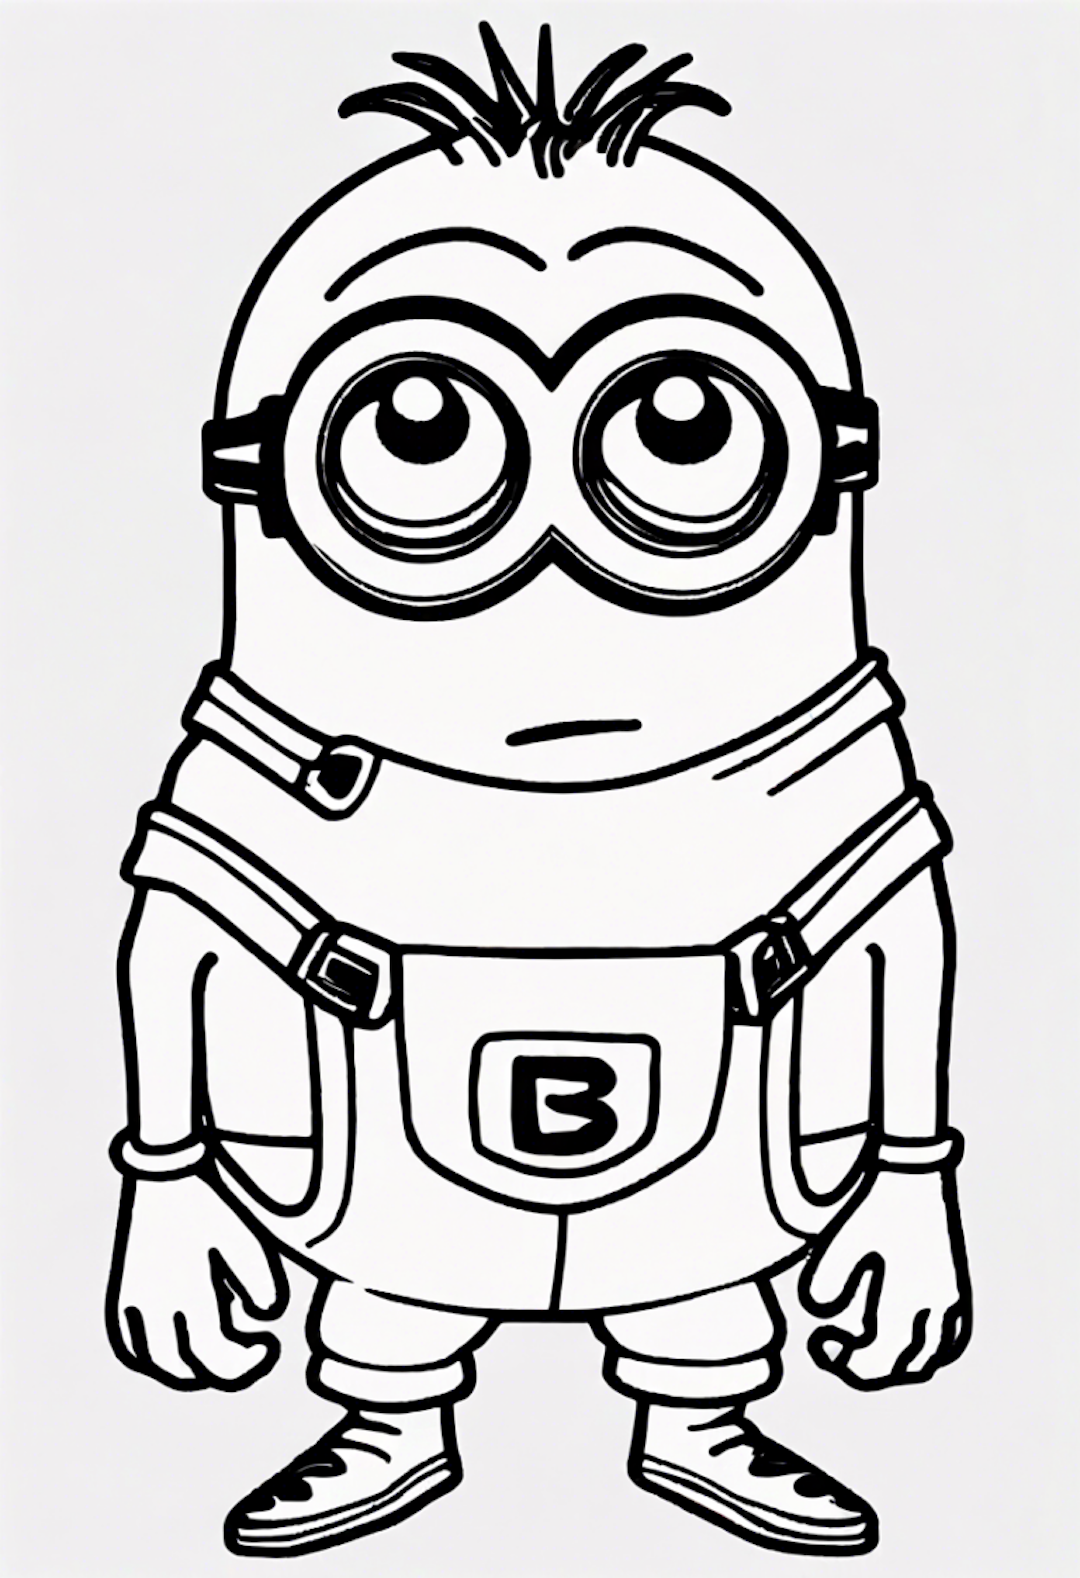 Bob the Minion Coloring Fun coloring pages